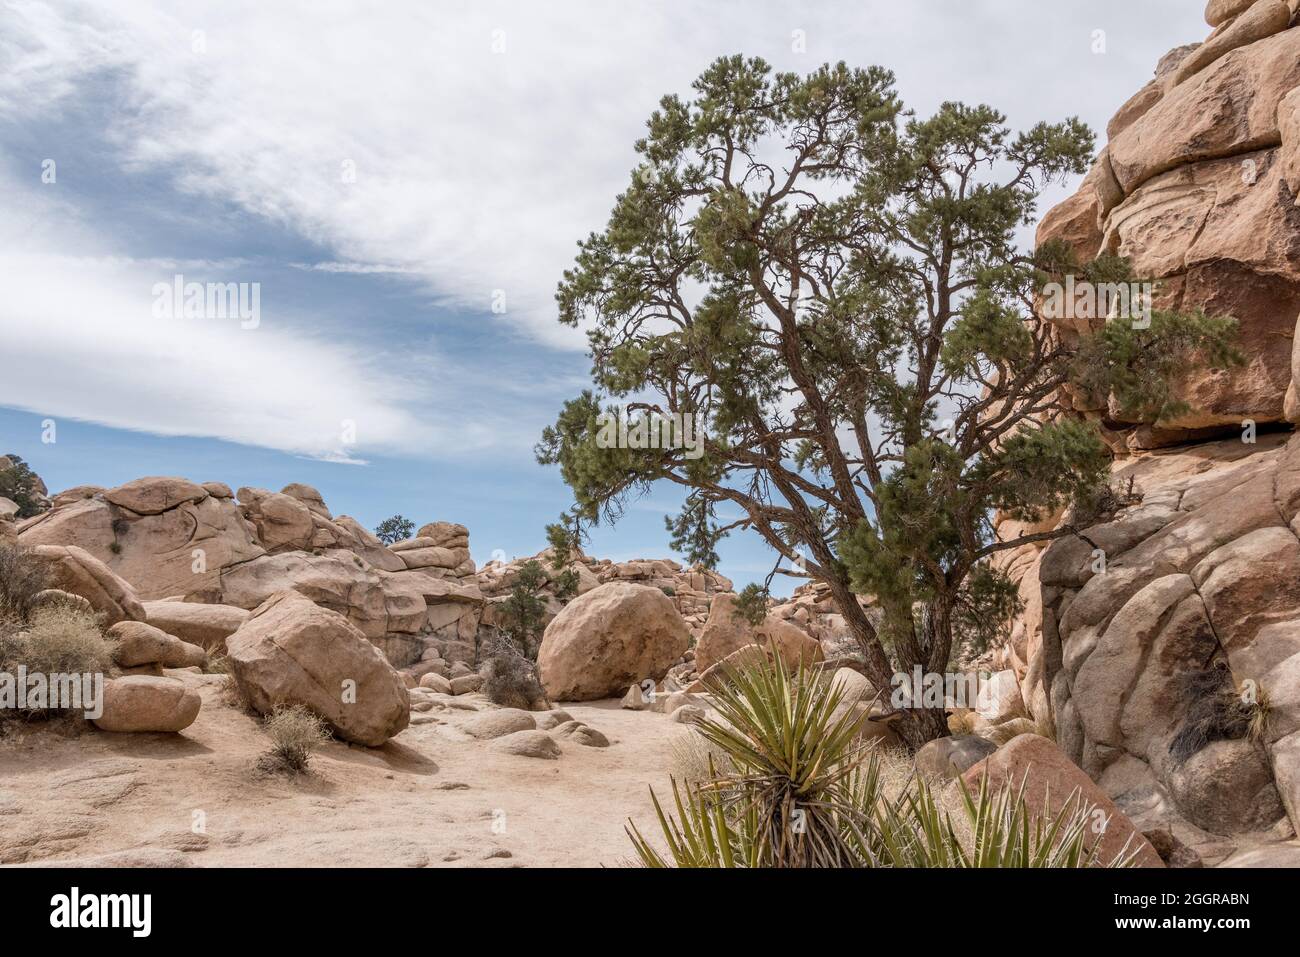 A pinyon pine tree grows near a high rocky wall along the Hidden Valley Nature Trail in Joshua Tree National Park. Stock Photo